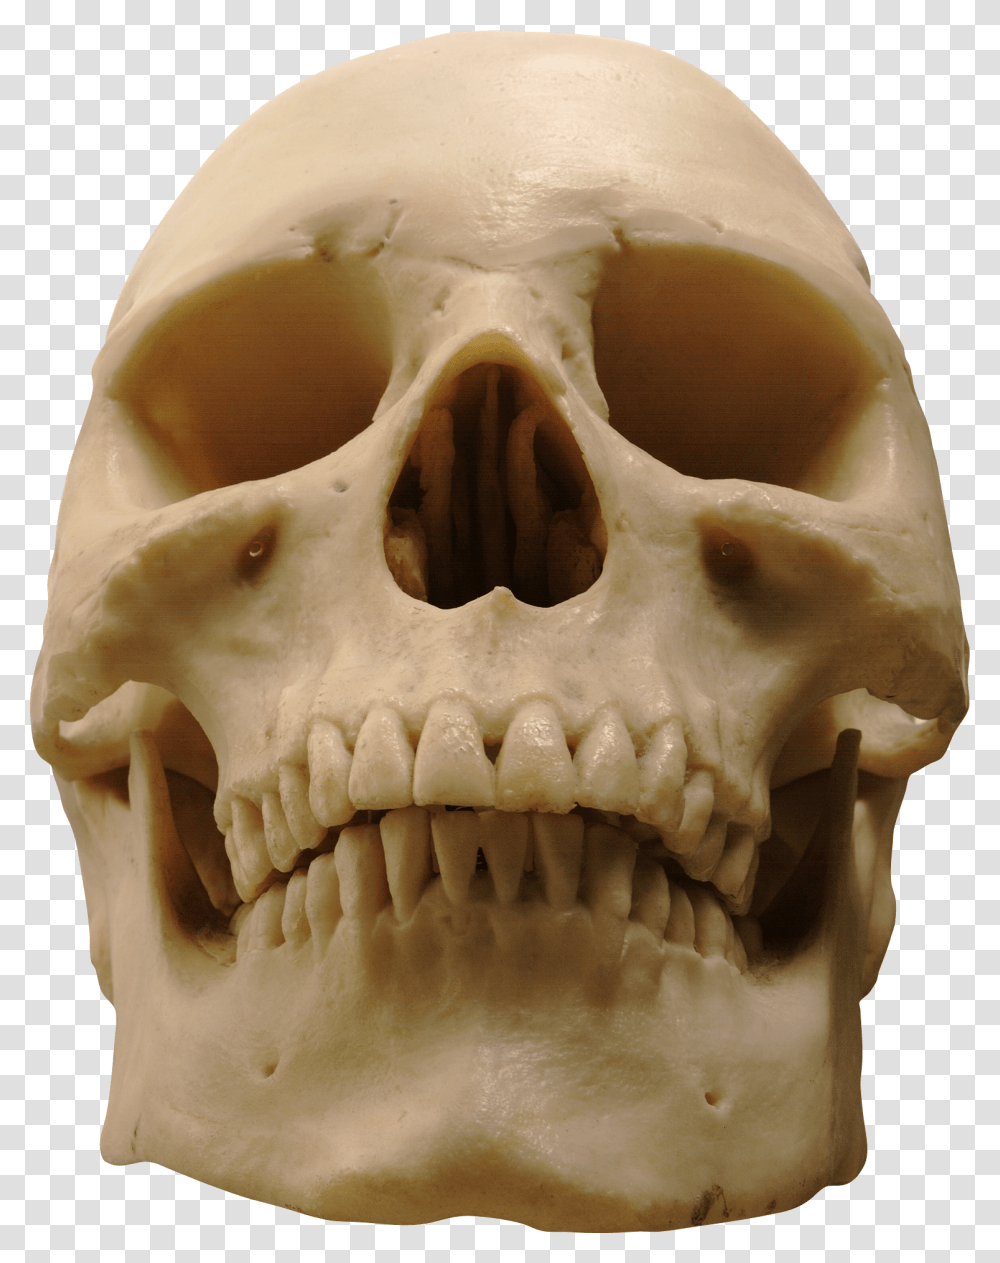 Pngs Skull, Jaw, Fossil, Fungus, Teeth Transparent Png